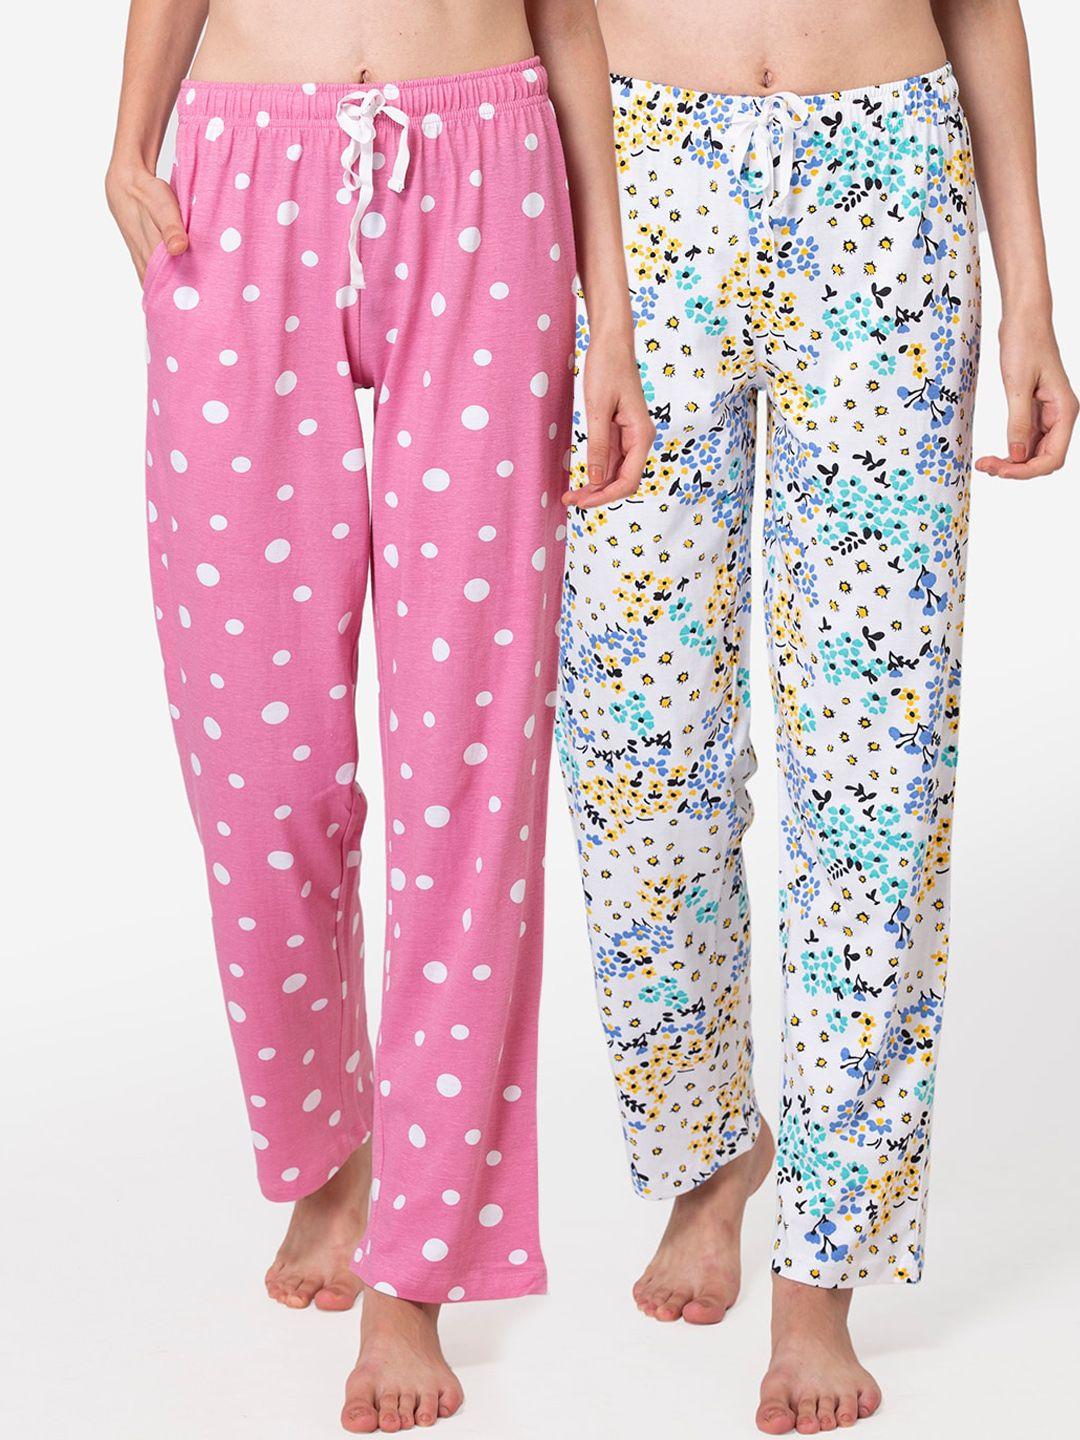 lounge dreams multi pack of 2 cotton printed lounge pants